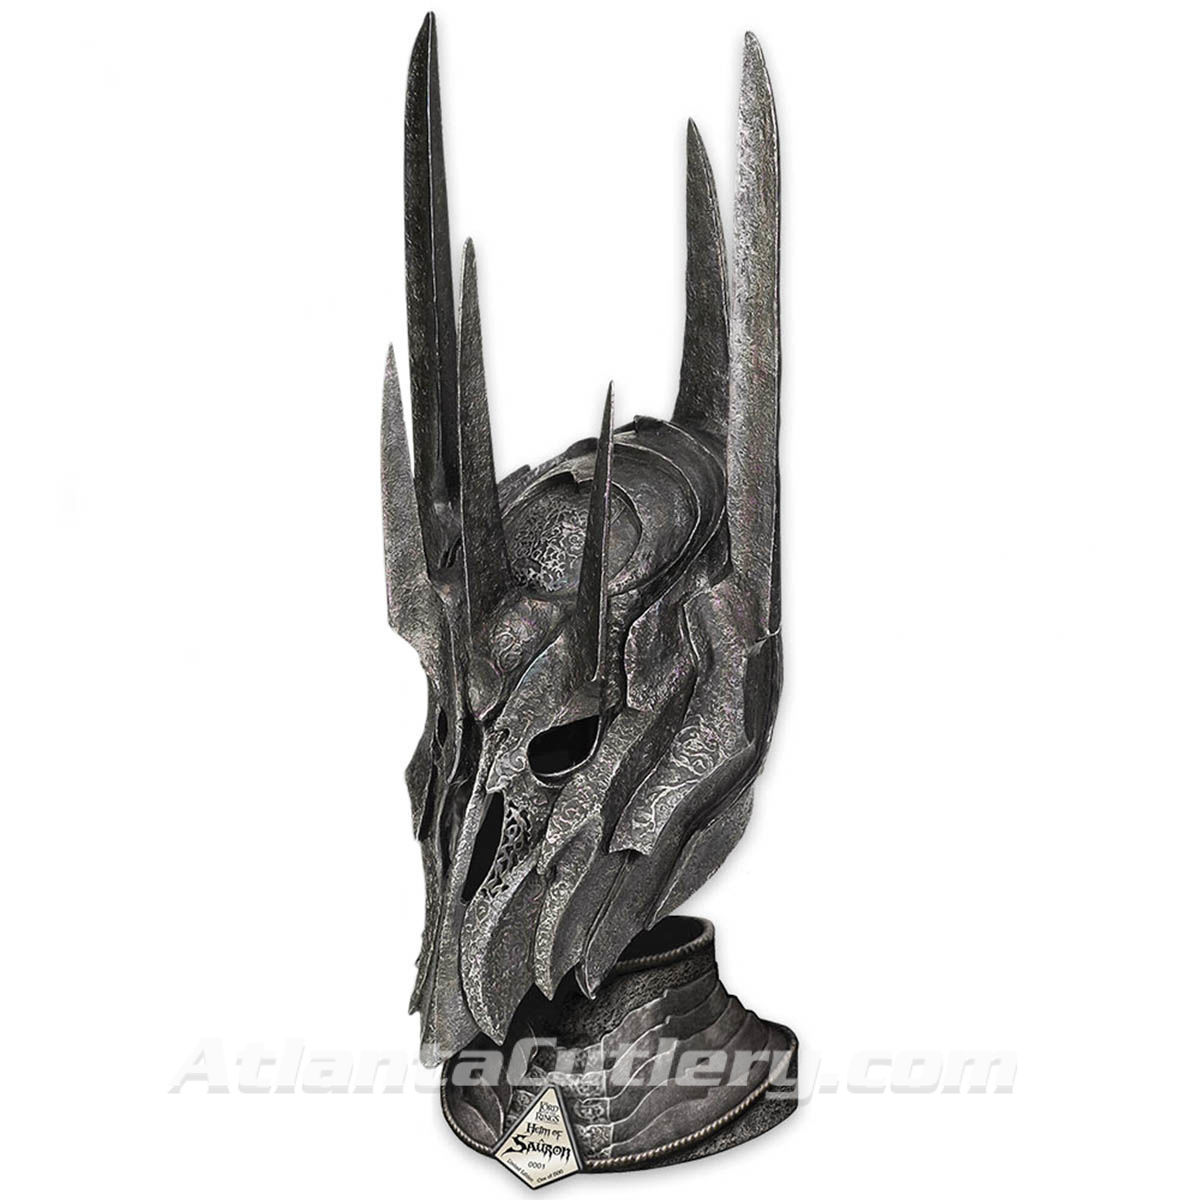 Licensed Lord of the Rings Helm of Sauron with Stand from United Cutlery